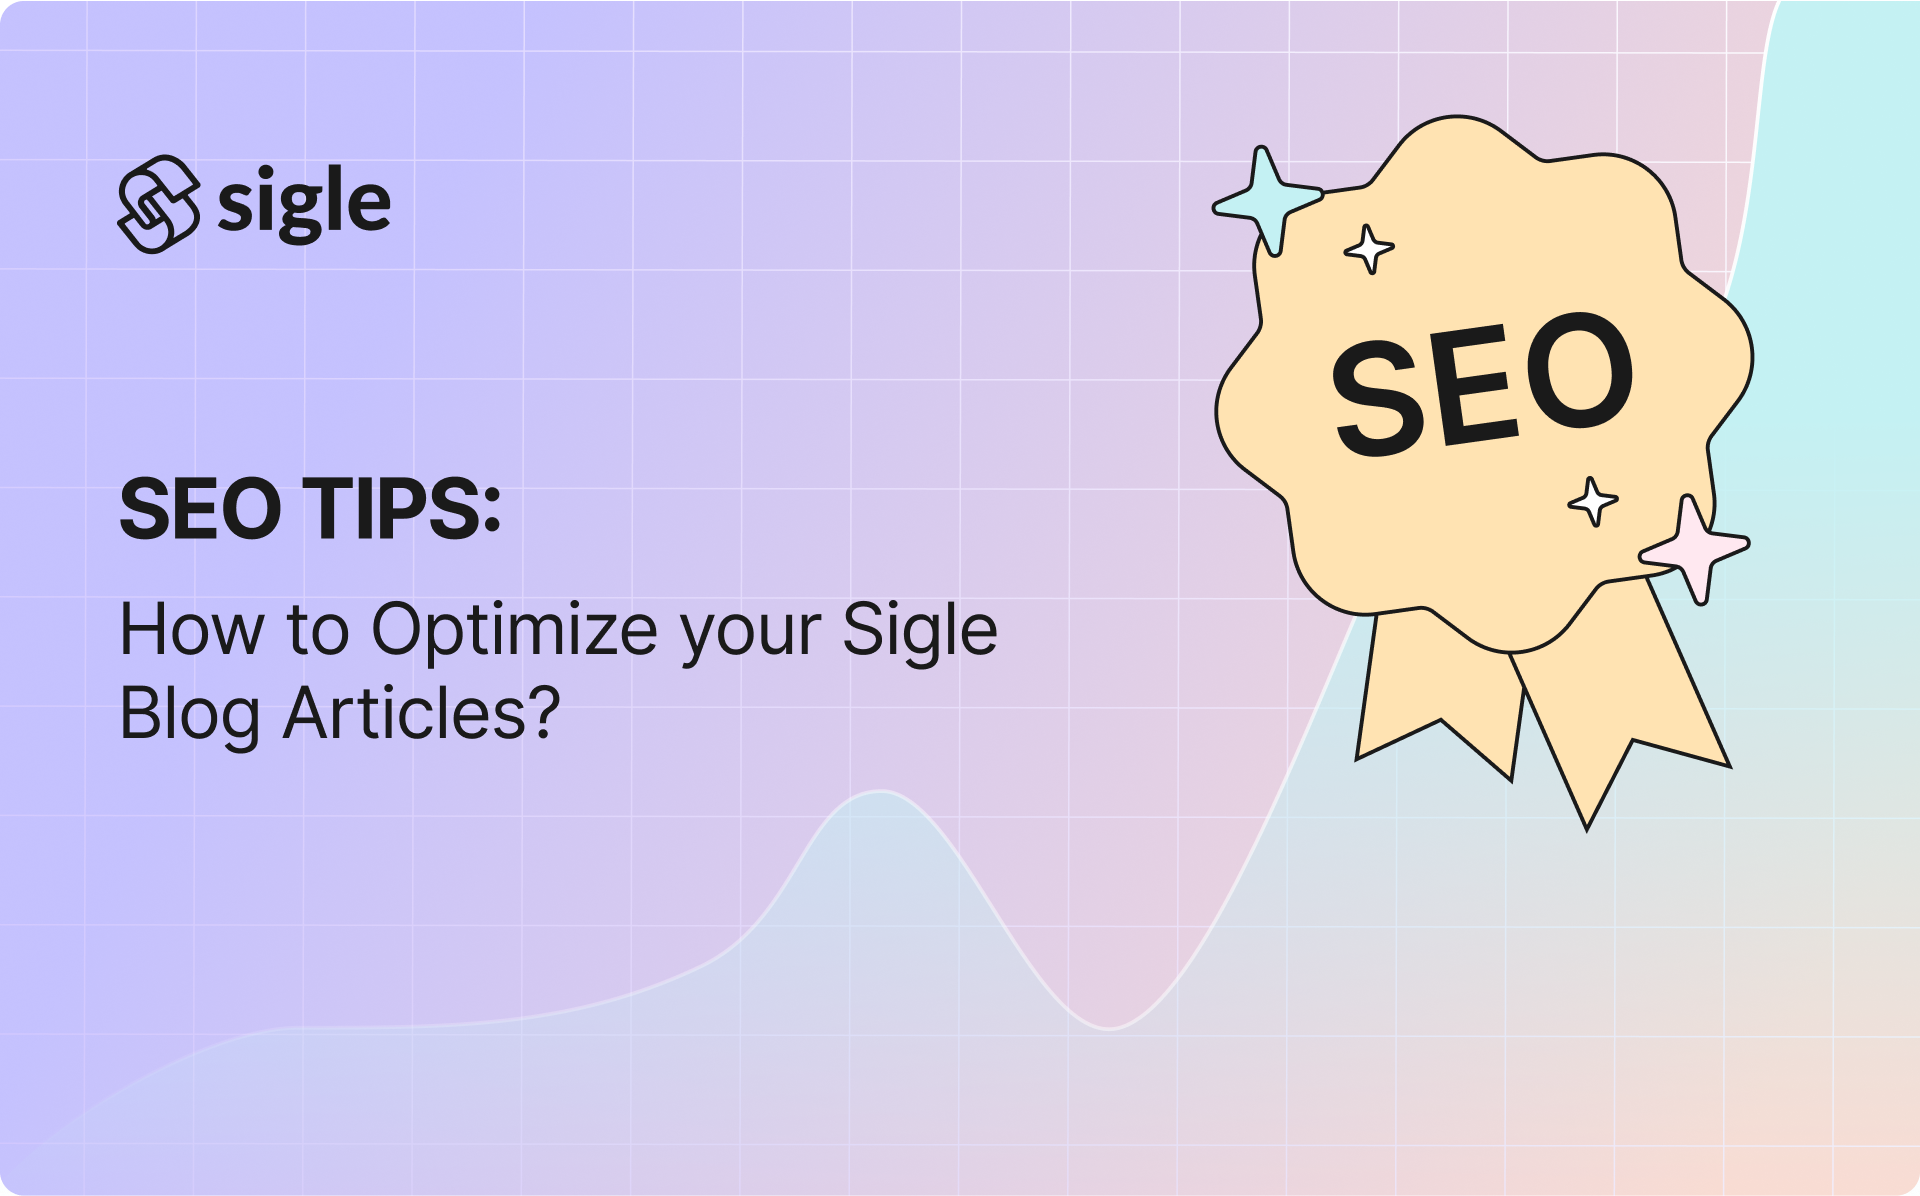 SEO Tips: How to Optimize your Sigle Blog Articles for Google?